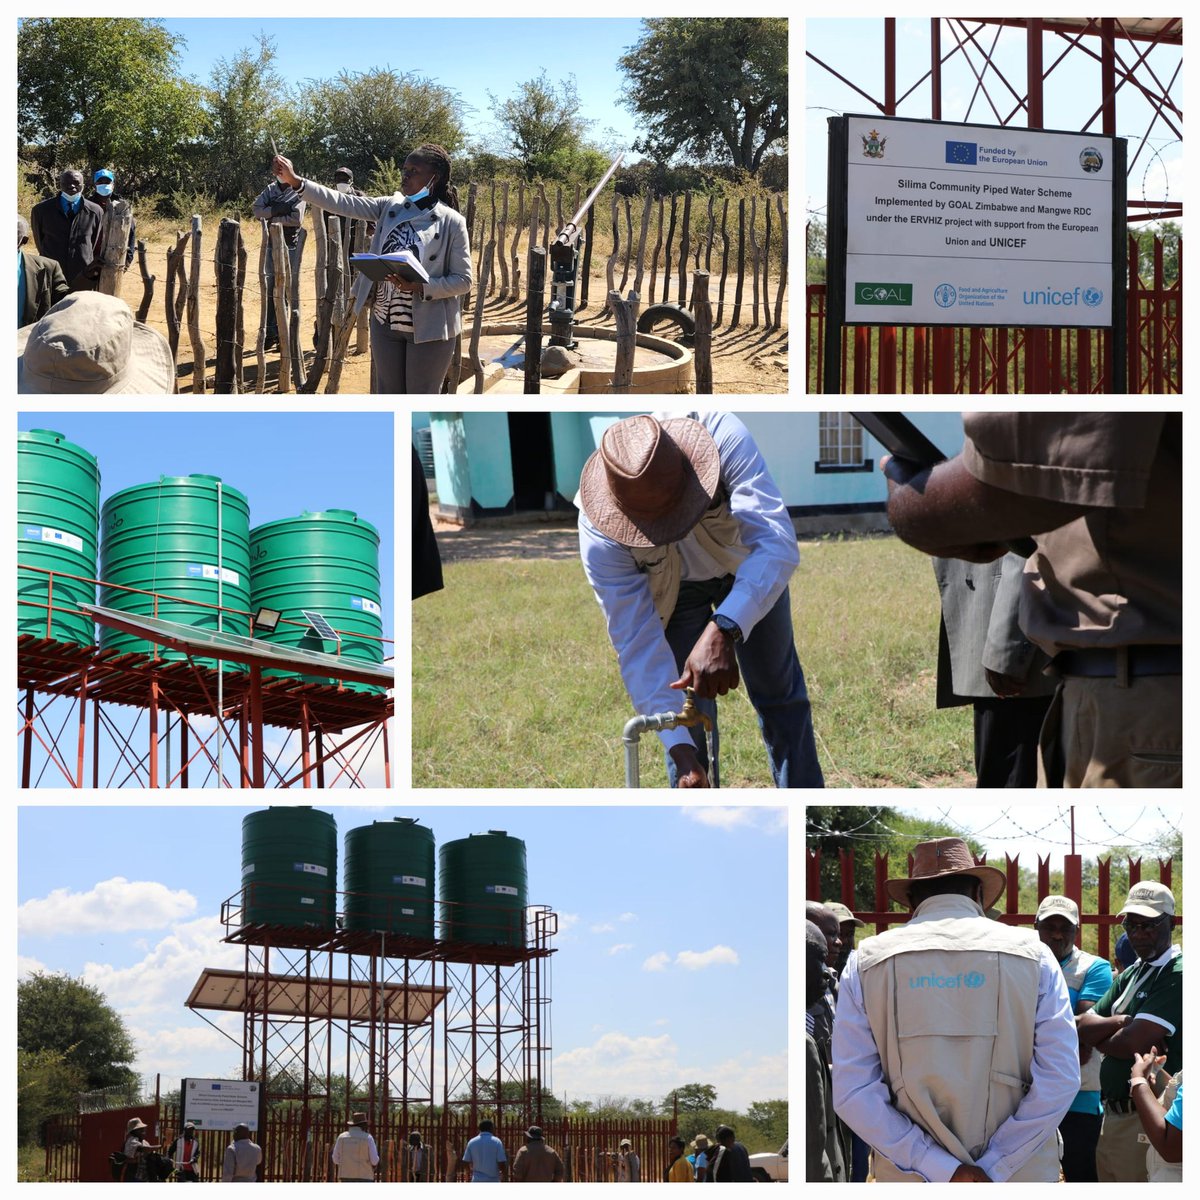 Real transformation from hand pump to #PipedWaterScheme in  Silima Village, Mangwe districts of MatSouth Prov 🇿🇼 in 11 months by #ERVHIZ project @MoLAFWRD_Zim @MoHCCZim @UNICEFZIMBABWE @faosfsafrica @GoalZimbabwe @sat_zim @nutriactionzim @euinzim local authorities & communities.